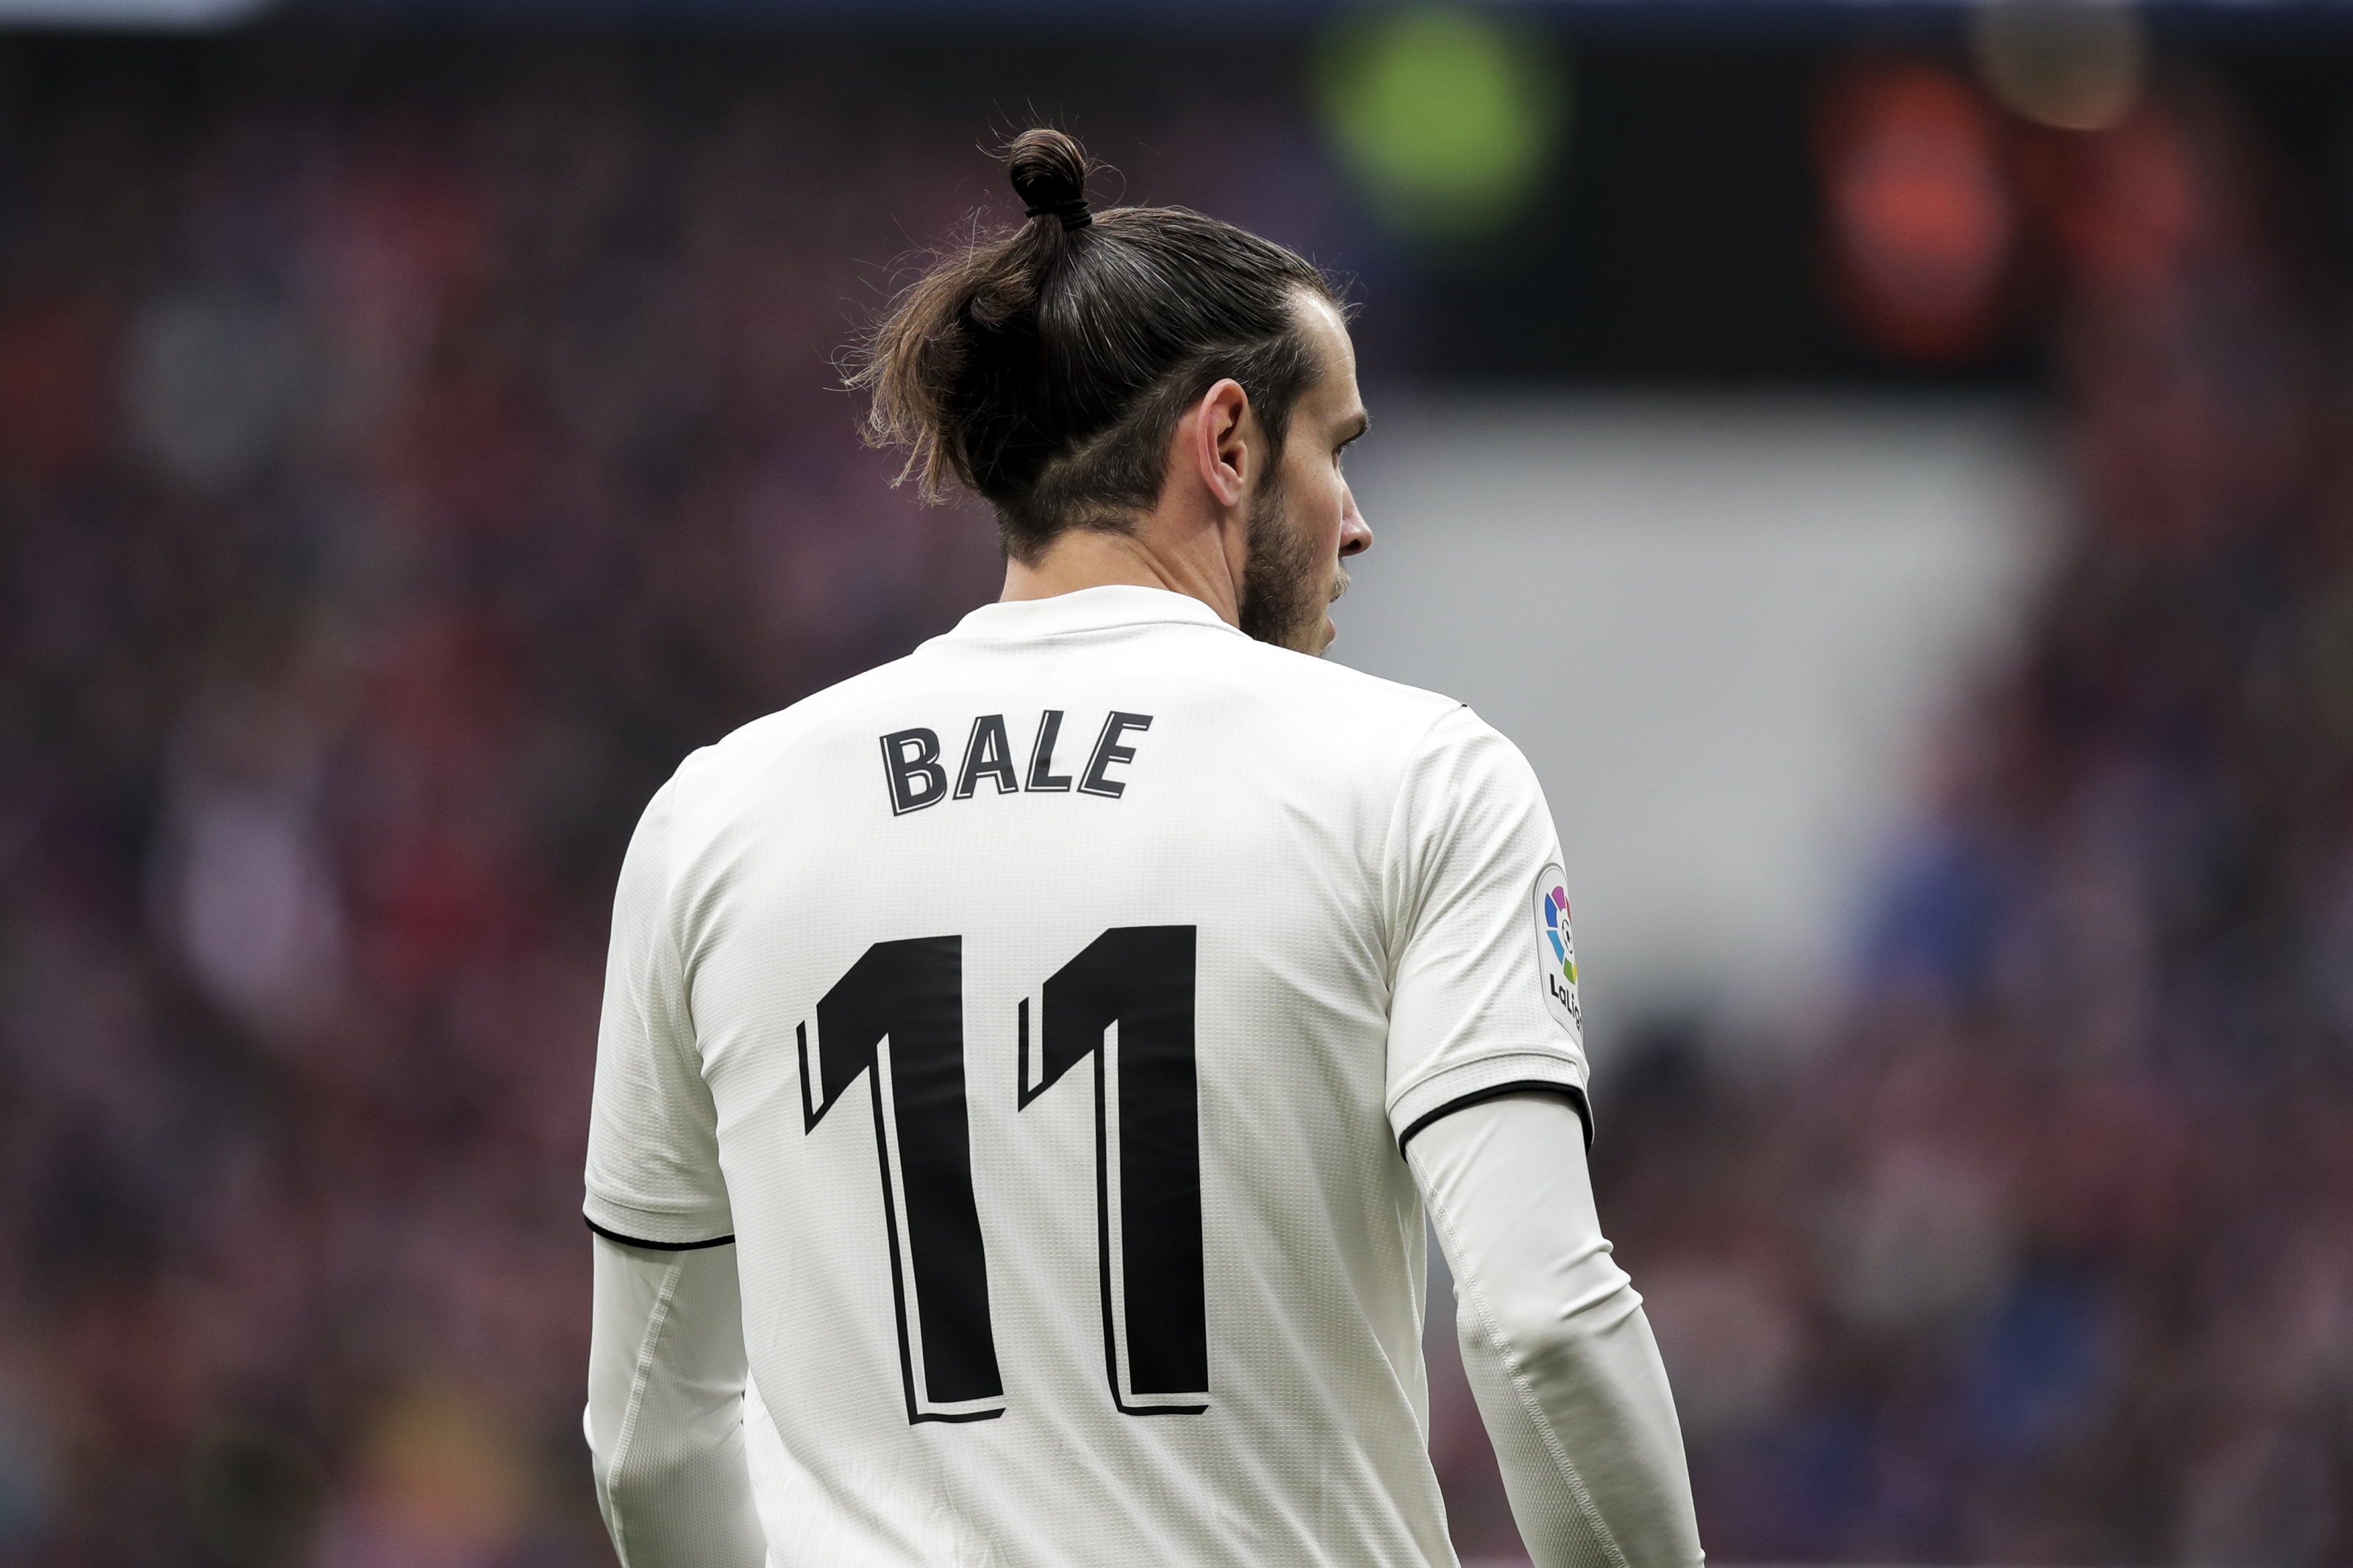 Gareth Bale's agent's comments about Real Madrid are wrong